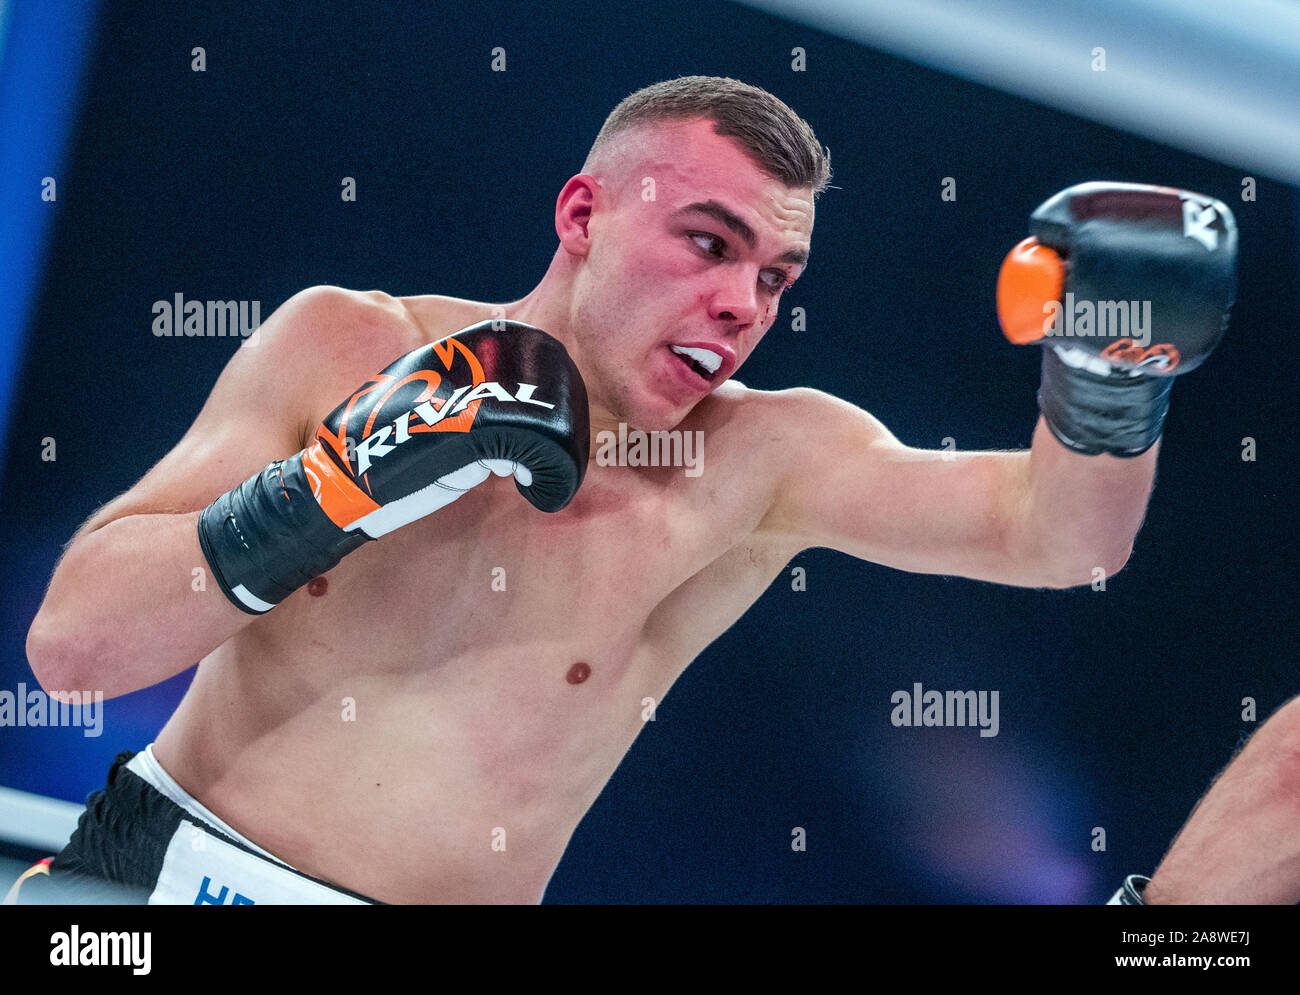 Hamburg, Germany. 09th Nov, 2019. Boxing: Boxing: Leon Bauer is boxing against Toni Kraft. Bauer wins the super middleweight fight. After a break of more than nine years, the public broadcaster ZDF rejoins the ring and broadcasts a live fight. The new Universum-Boxstall in Hamburg would like to achieve a considerable audience response at its TV premiere. Credit: Jens Büttner/dpa-Zentralbild/dpa/Alamy Live News Stock Photo